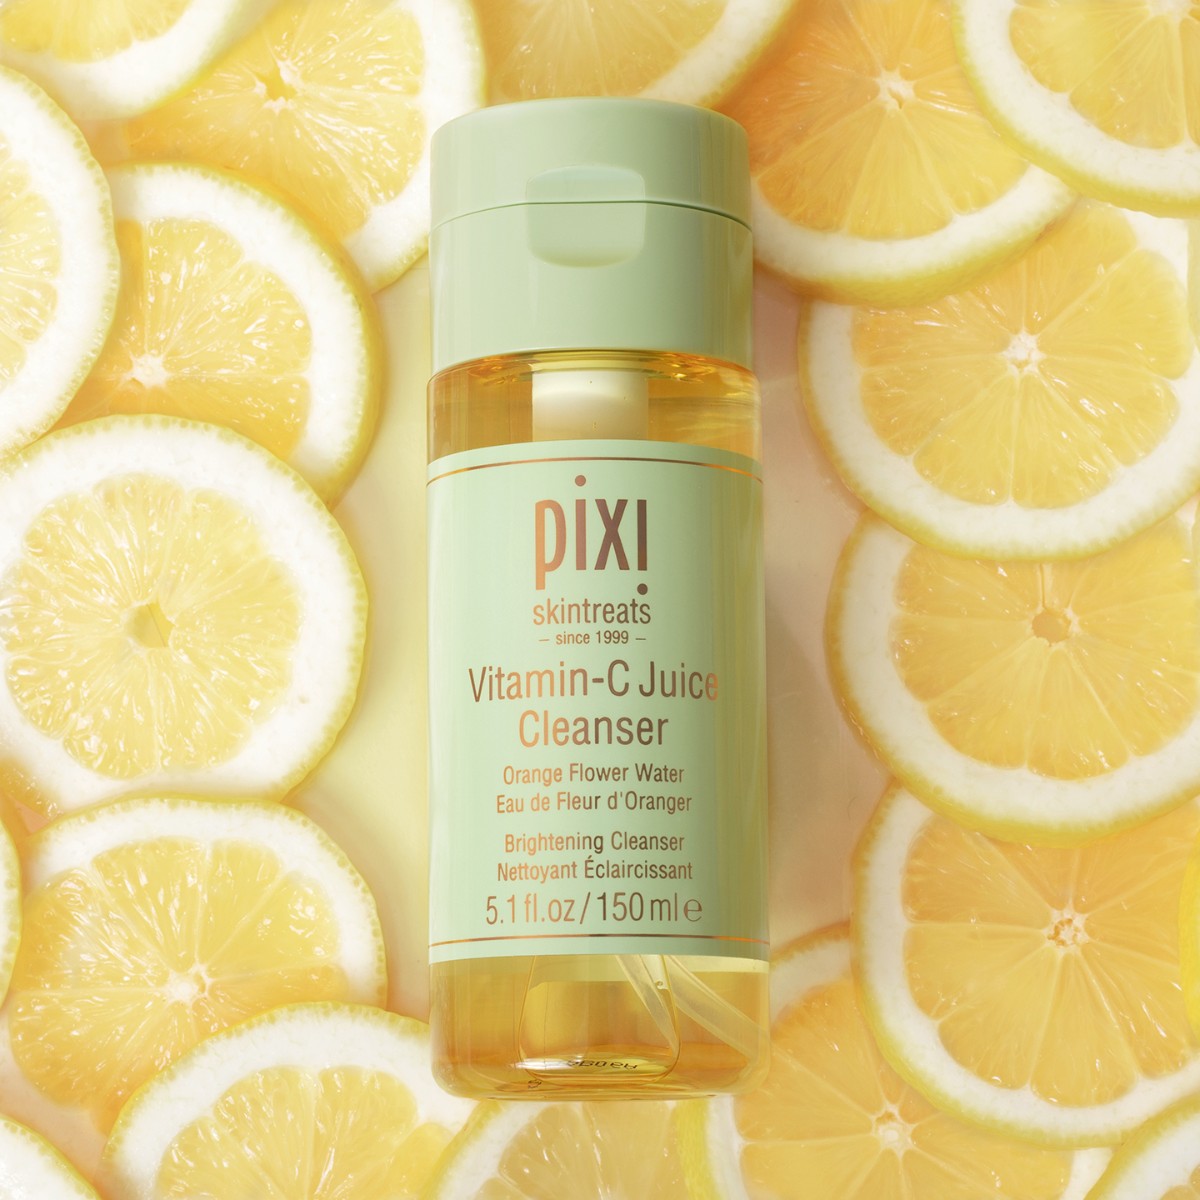 Cleanse, tone and brighten with our Vitamin-C Juice Cleanser! This cleansing juice will help preserve and protect complexion while boosting skin's natural luminosity. ⠀⠀⠀⠀⠀⠀⠀⠀⠀ 🍋 Orange Flower Water 🍋 Vitamin-C 🍋 Ferulic Acid ⠀⠀⠀⠀⠀⠀⠀⠀⠀ #PixiBeauty #Skintreats